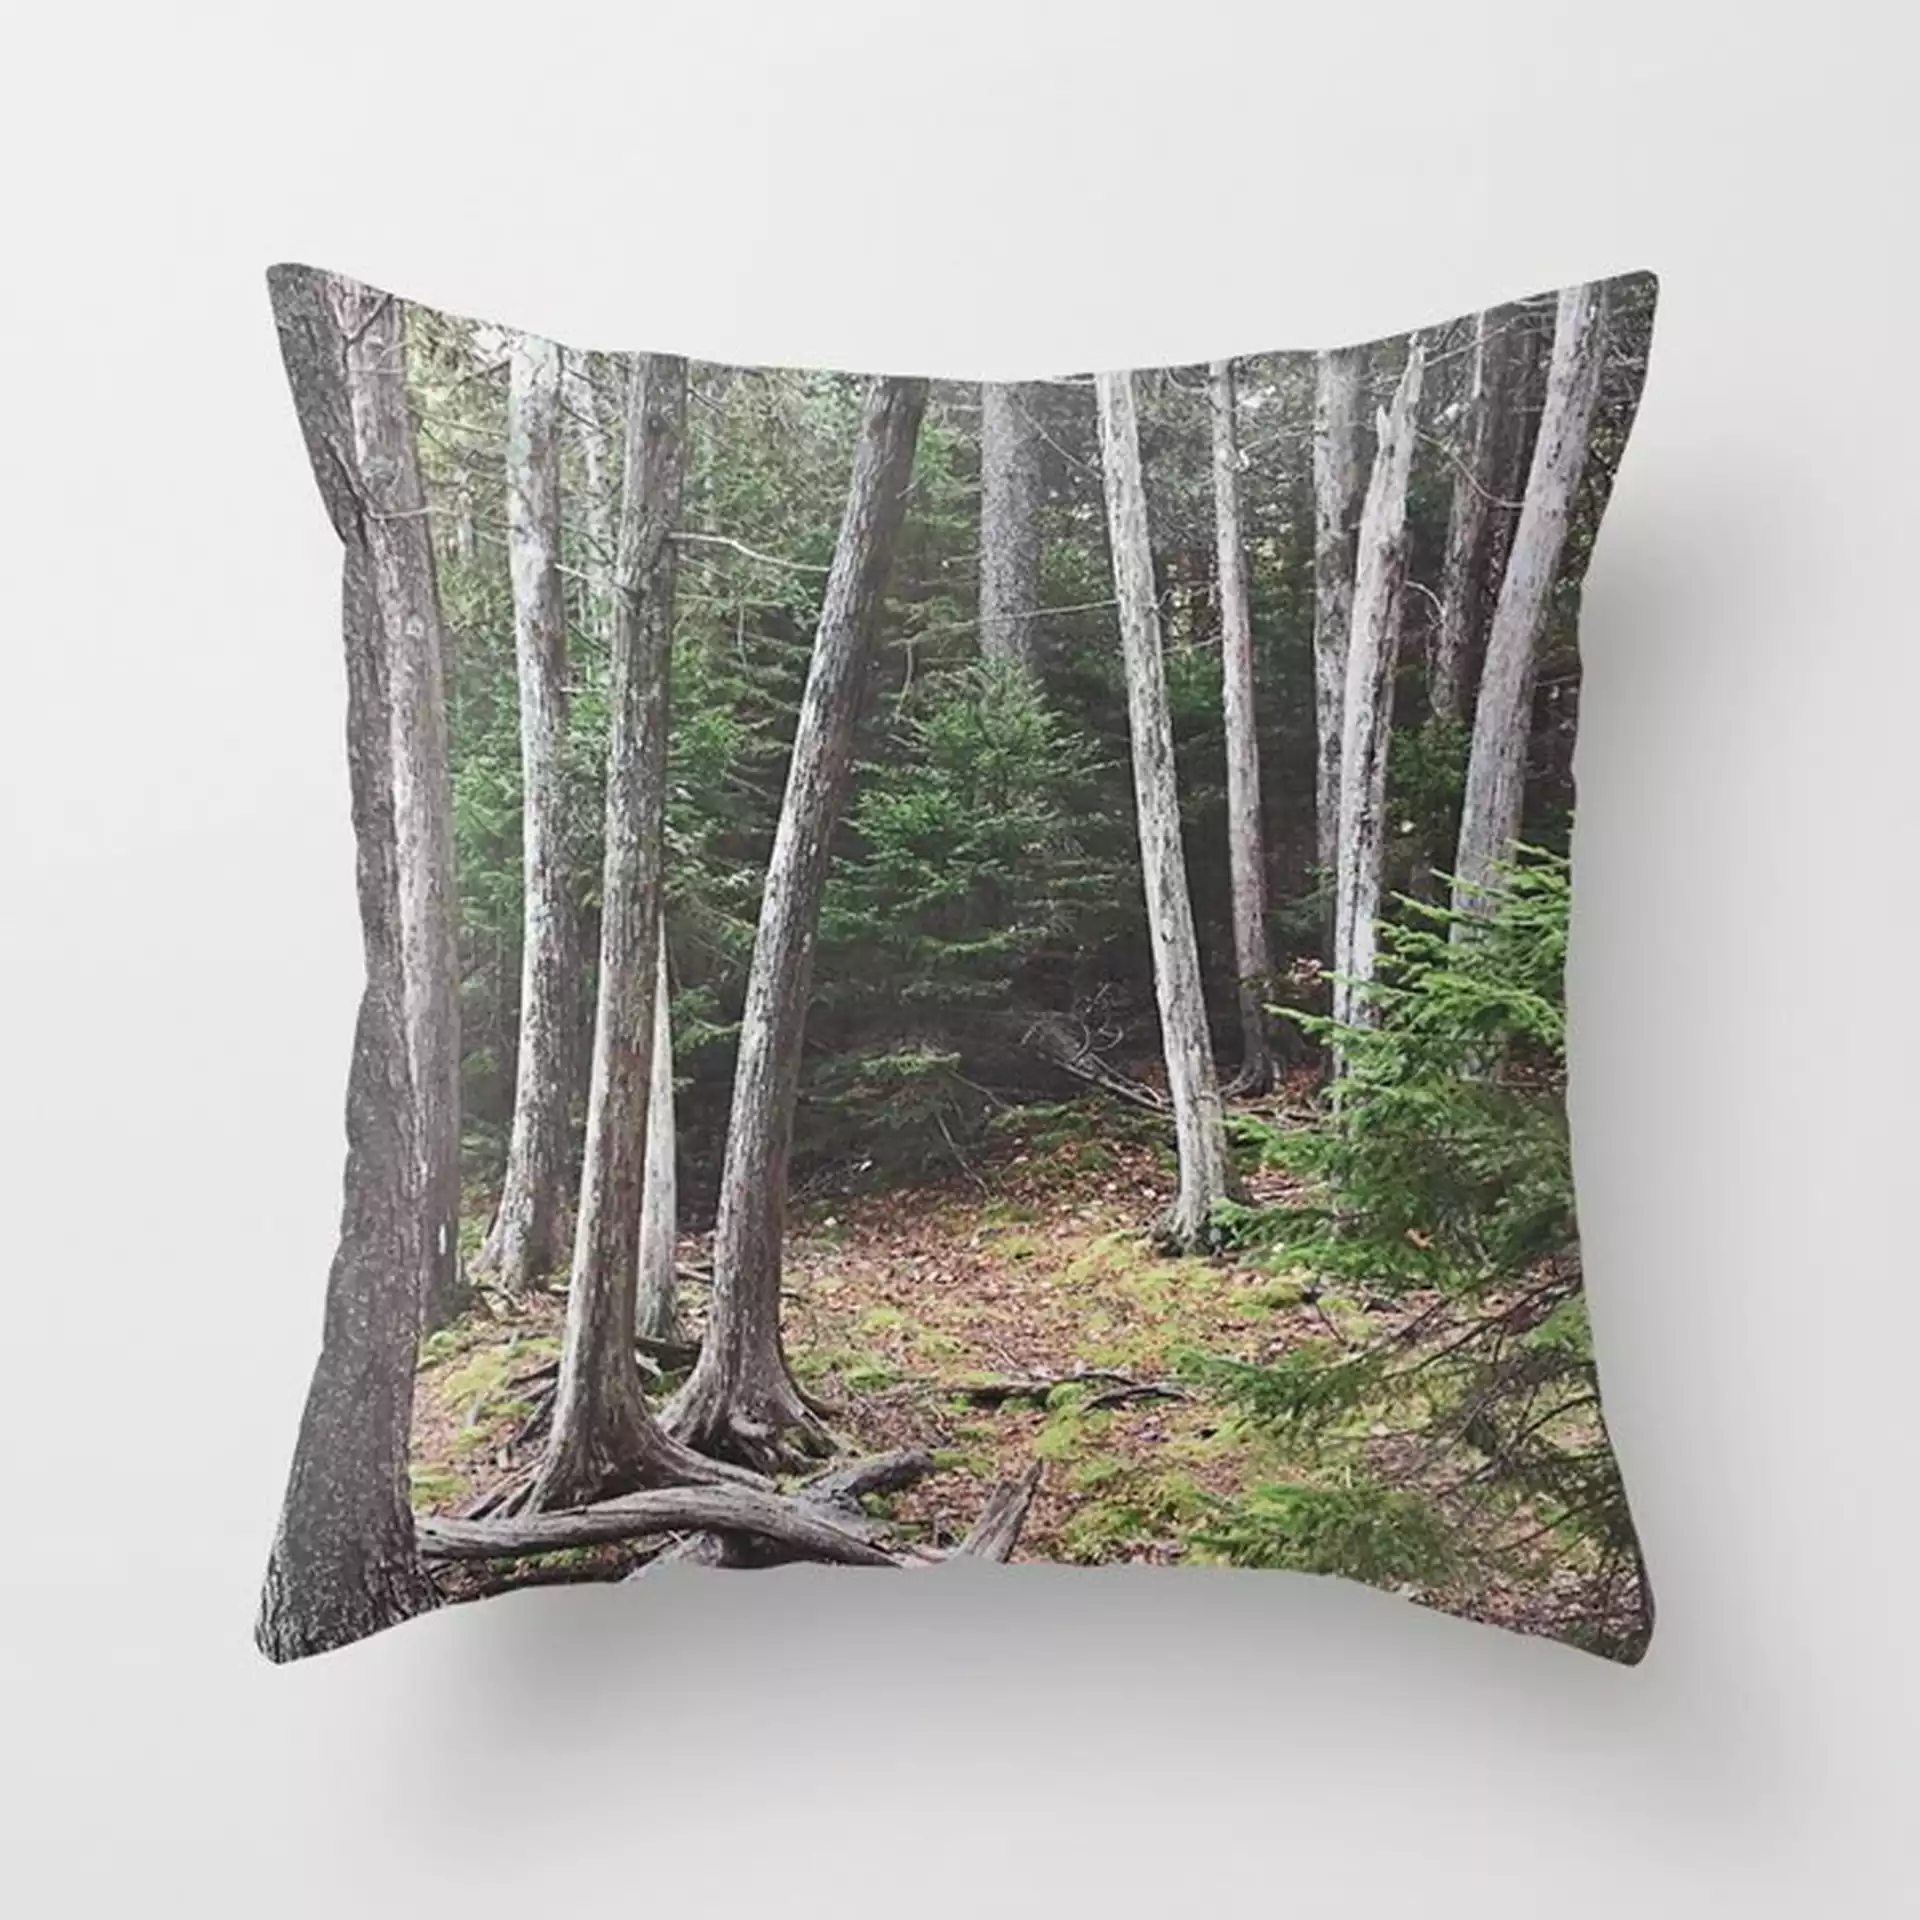 Maine Woods Couch Throw Pillow by Olivia Joy St.claire - Cozy Home Decor, - Cover (16" x 16") with pillow insert - Outdoor Pillow